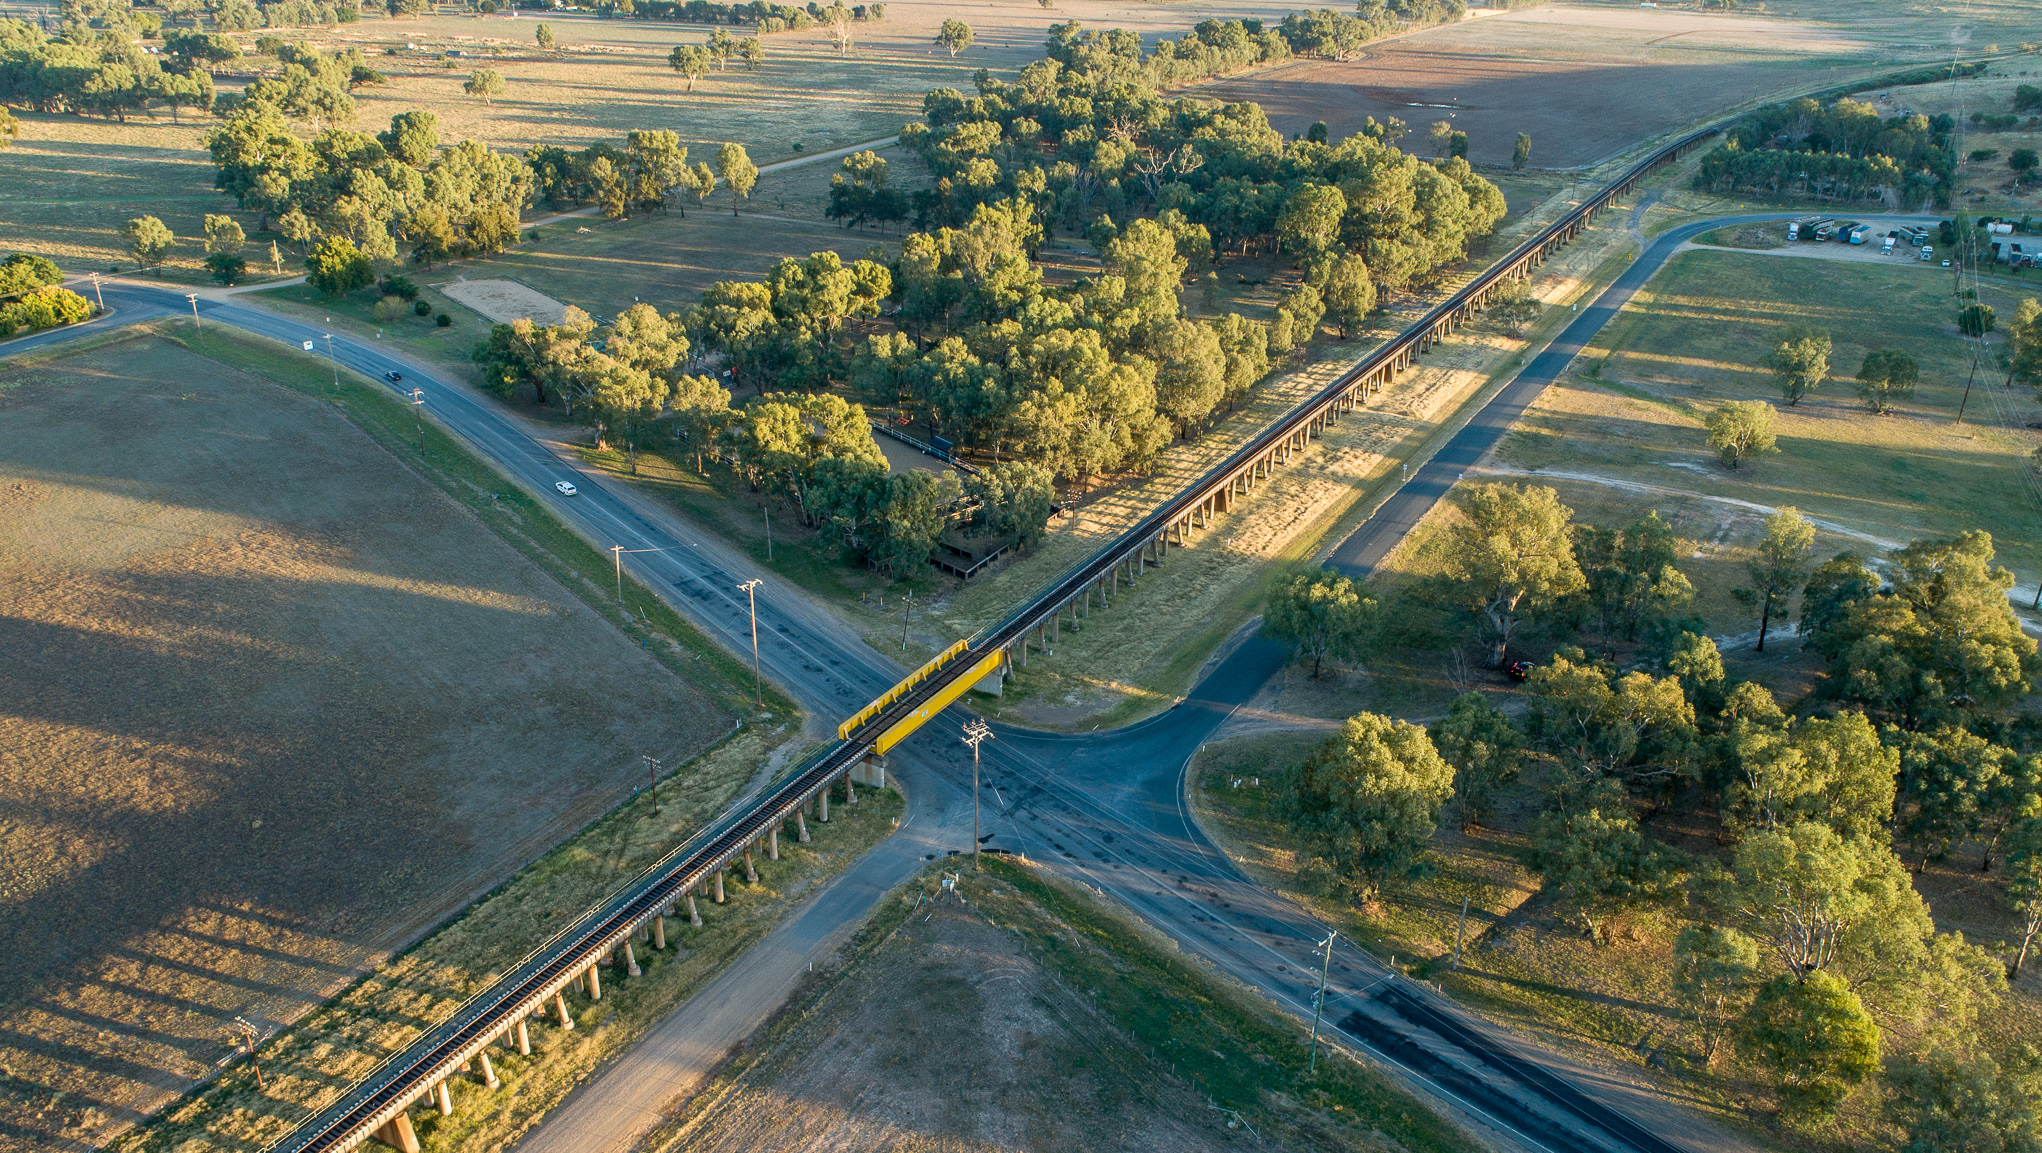 Aerial view of the Railway bridge over Oura Road, New South Wales.